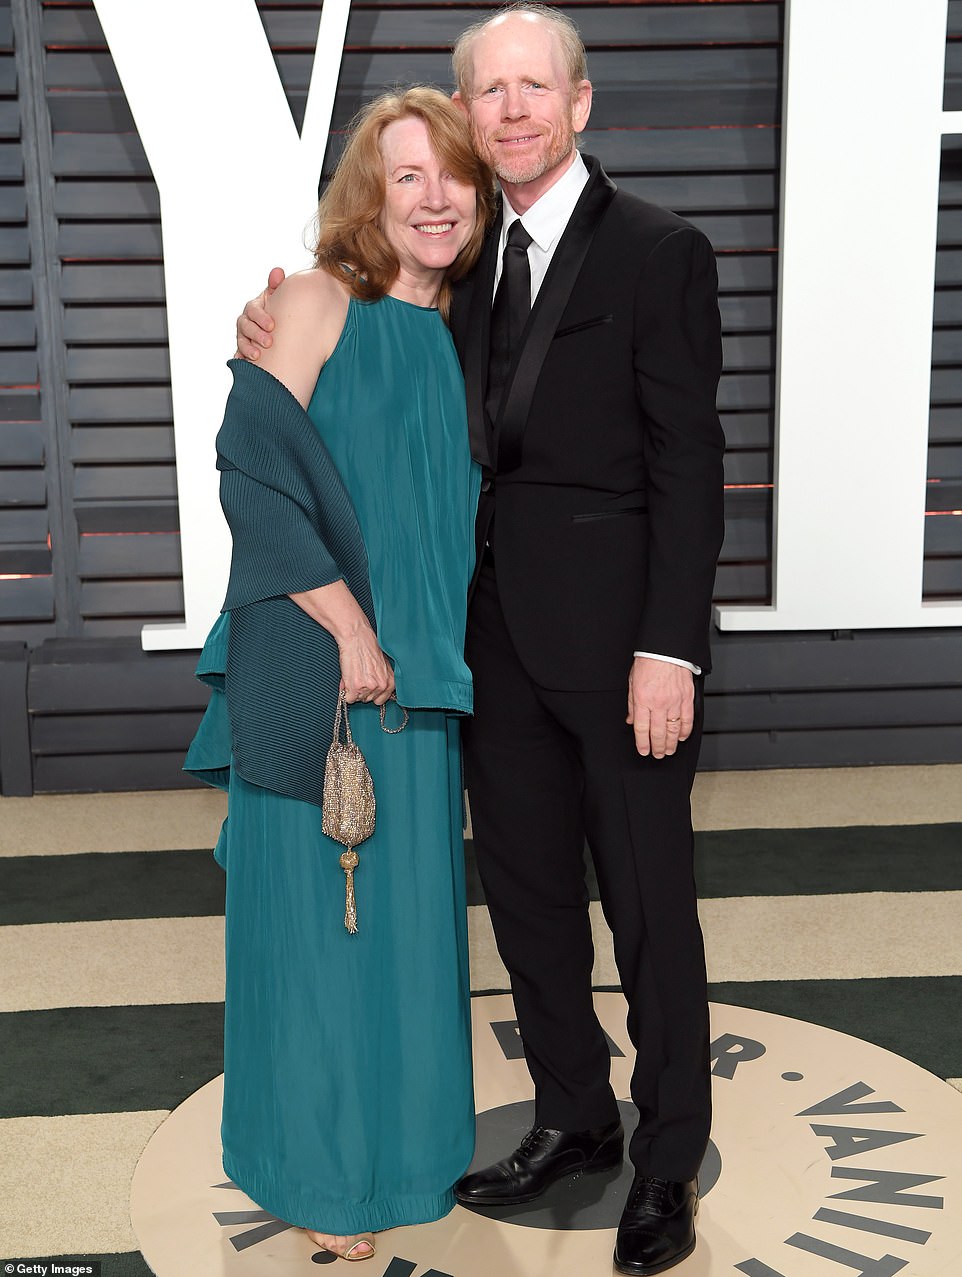 Side by side: Ron himself has been married to his wife, Sheryl Howard, mother of the bride, since 1975 when he was known as an actor rather than the star director he has since become;  Filmed in 2017 at Vanity Fair Oscar Party